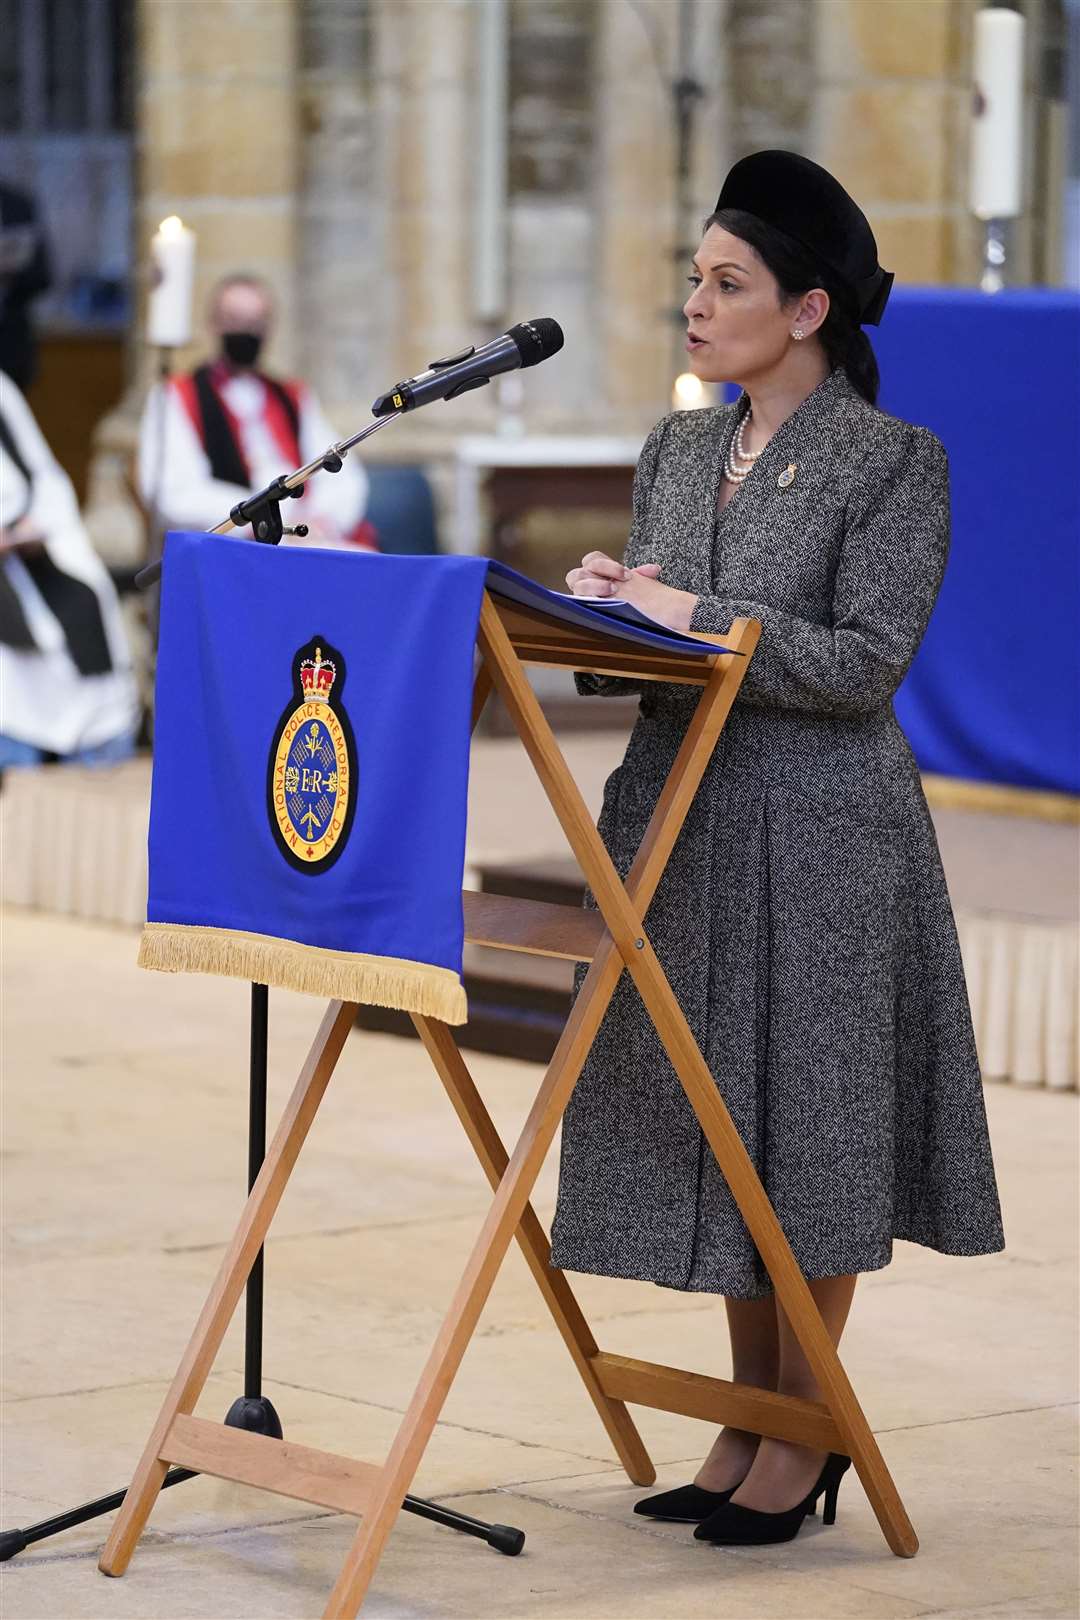 Home Secretary Priti Patel read a passage from the Bible to mark NPMD at Lincoln Cathedral (Danny Lawson/PA)